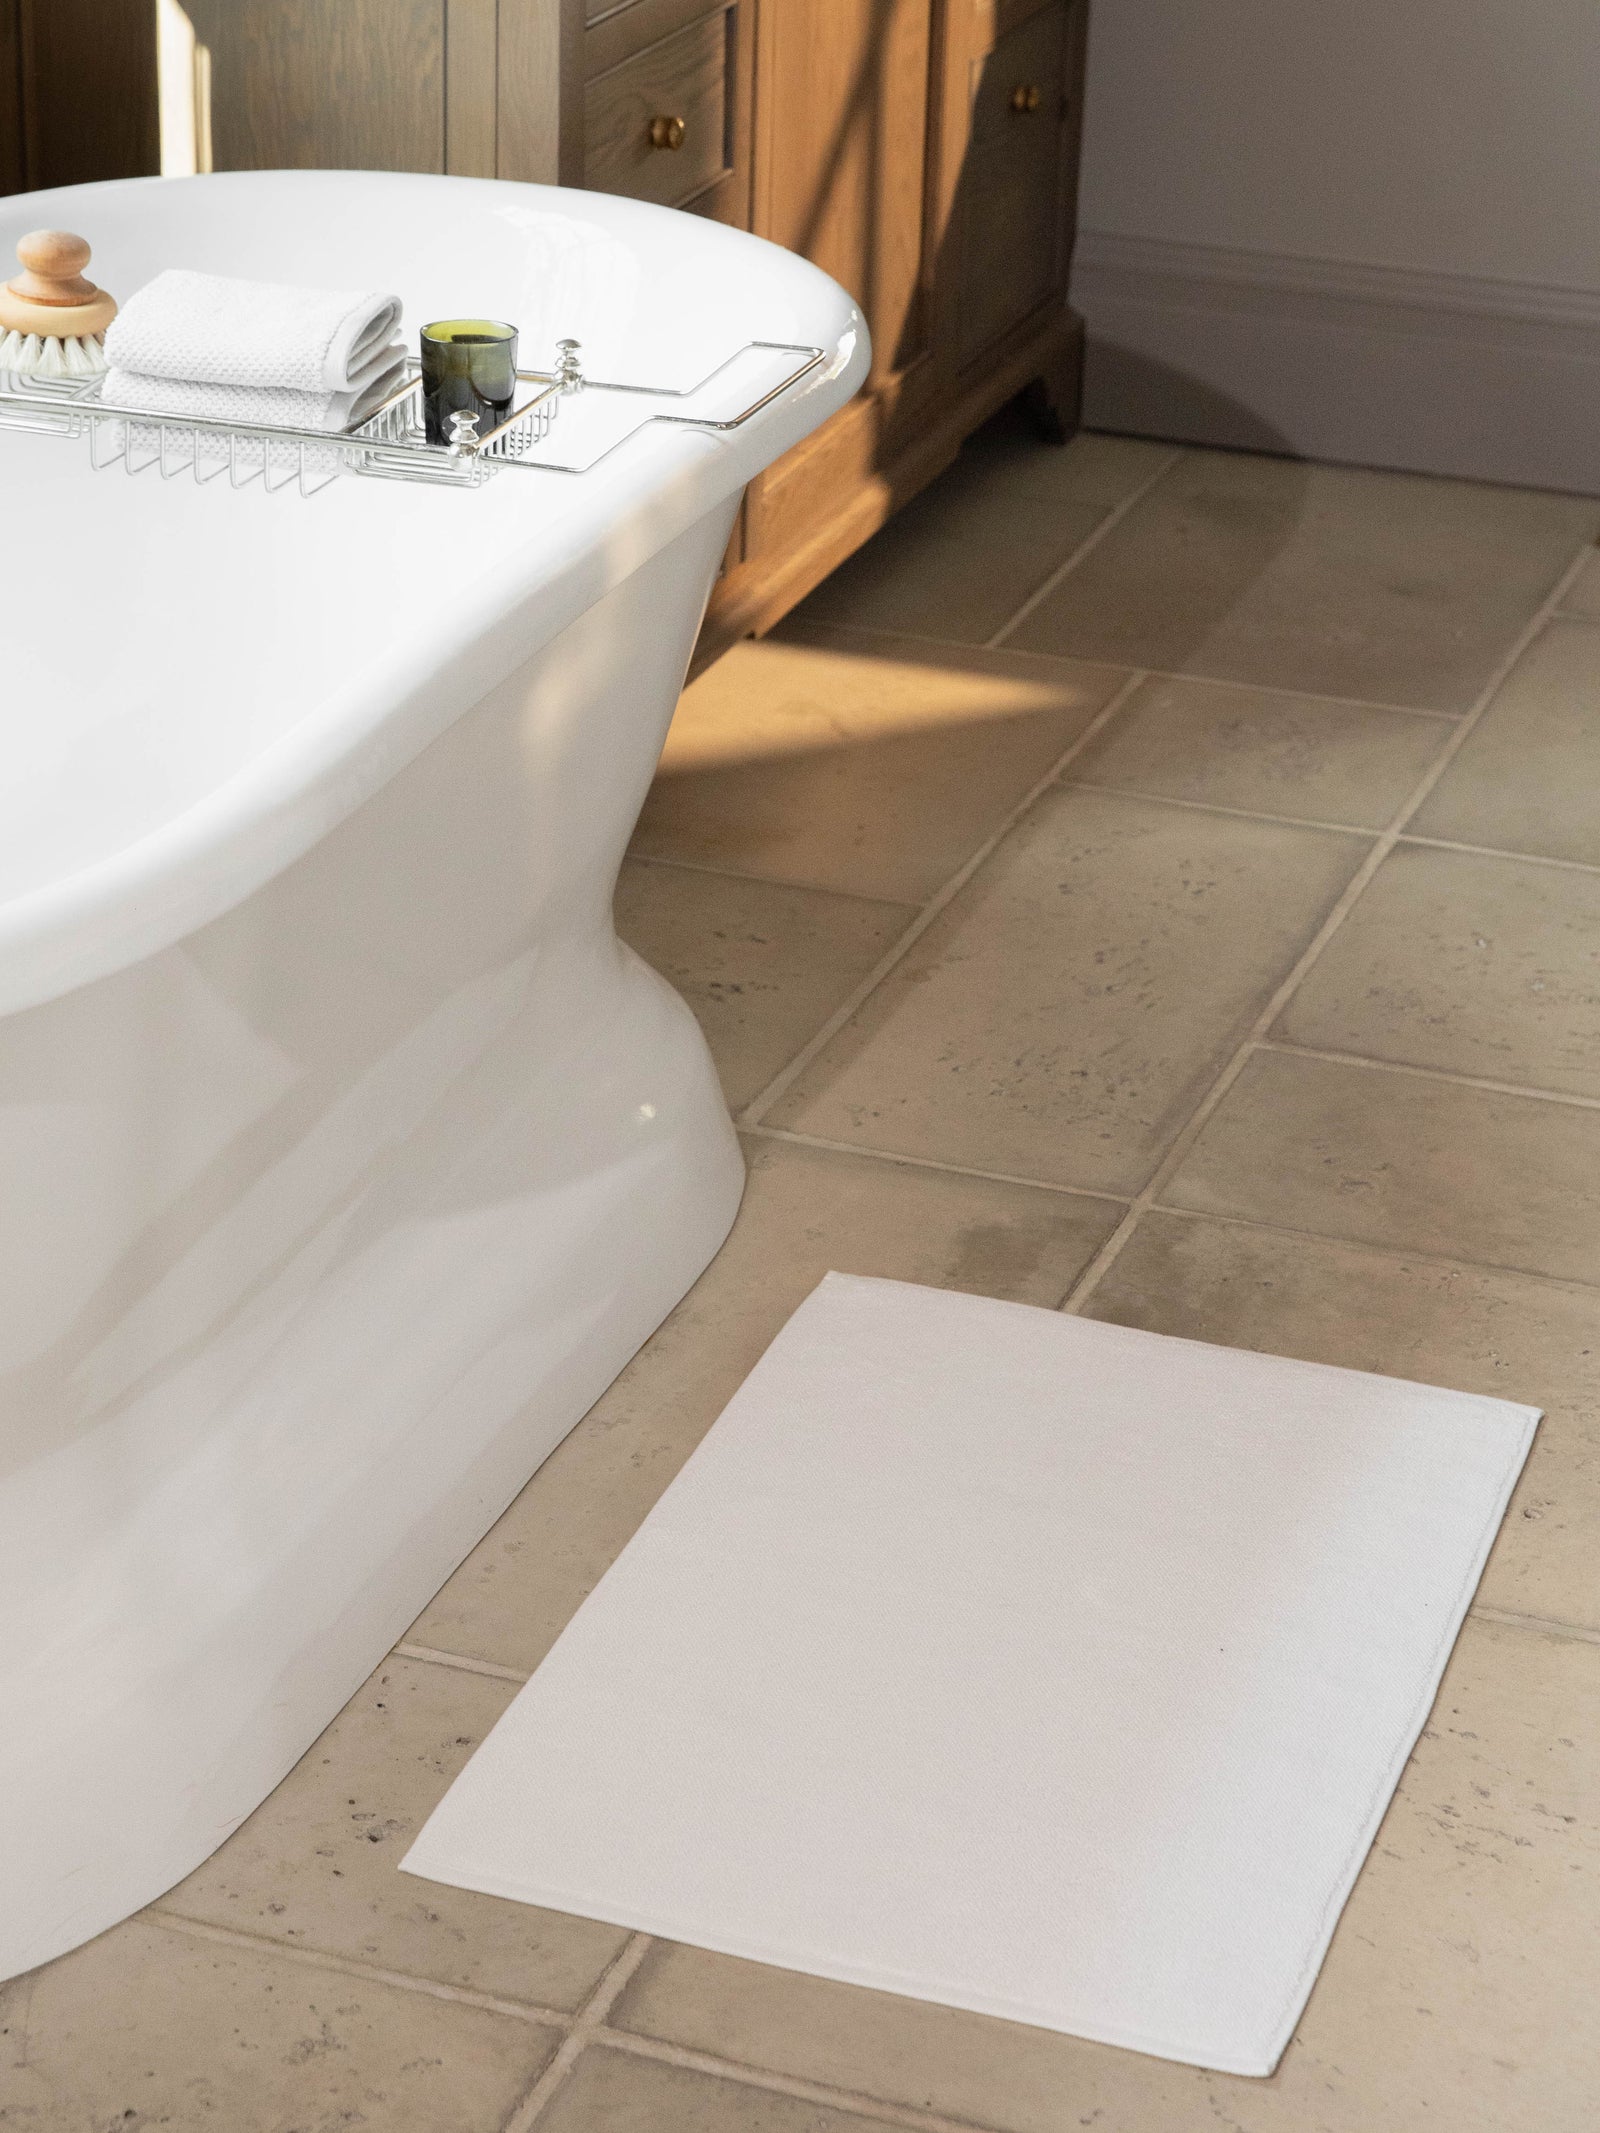 White looped terry bath mat resting on bathroom floor in front of bathtub. 